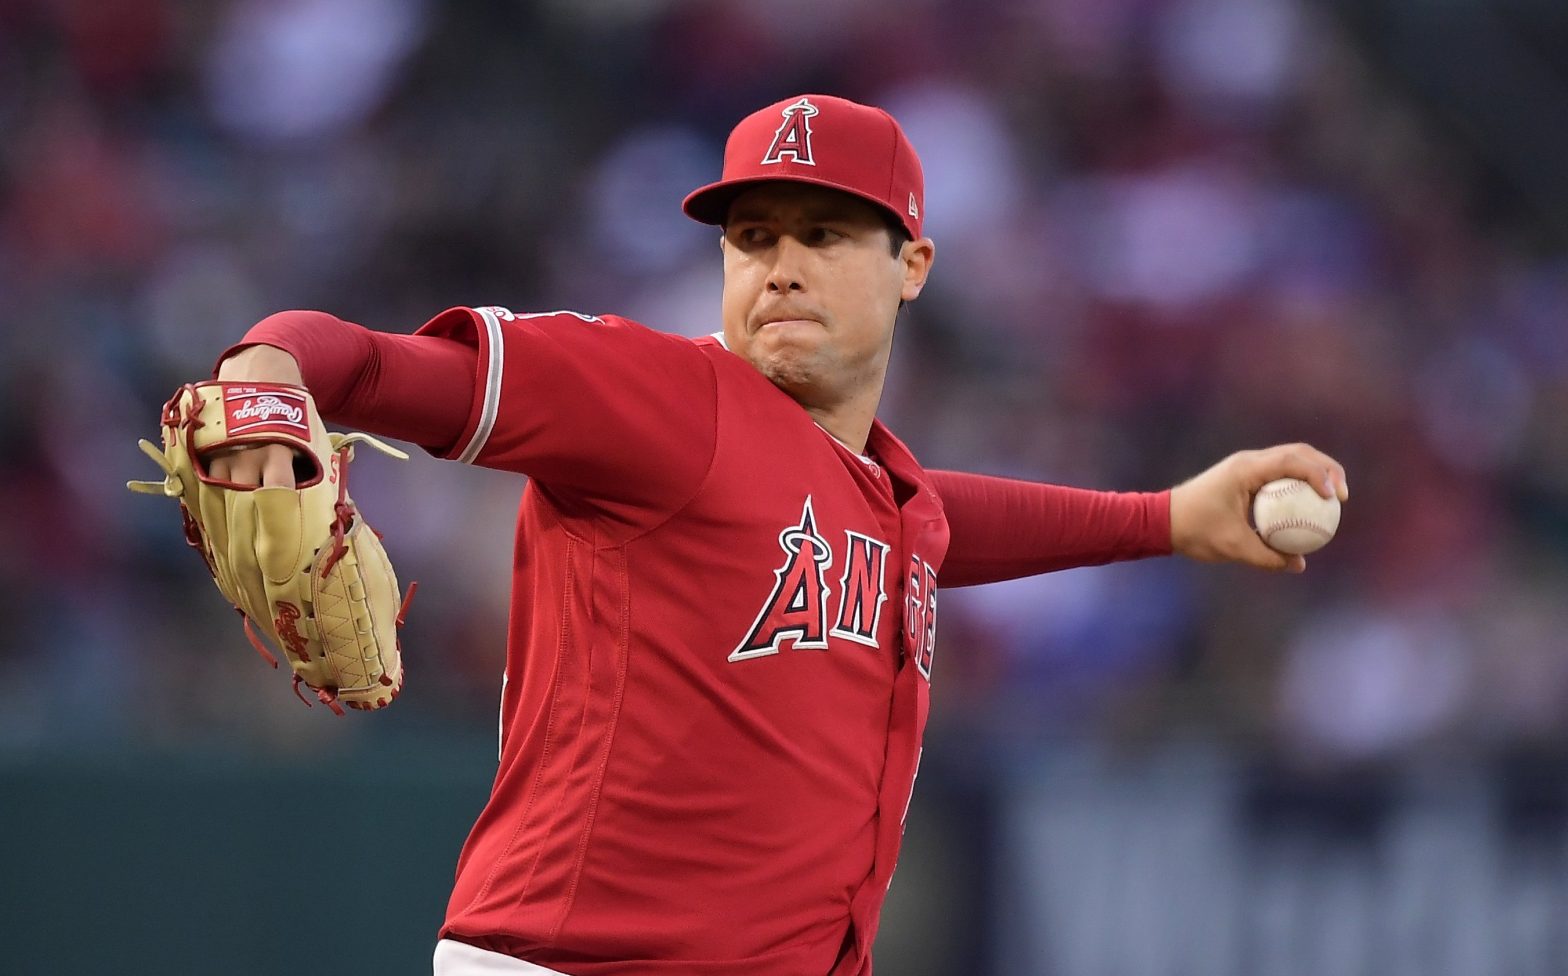 ESPN reports Angels PR employee supplied Skaggs with opioids